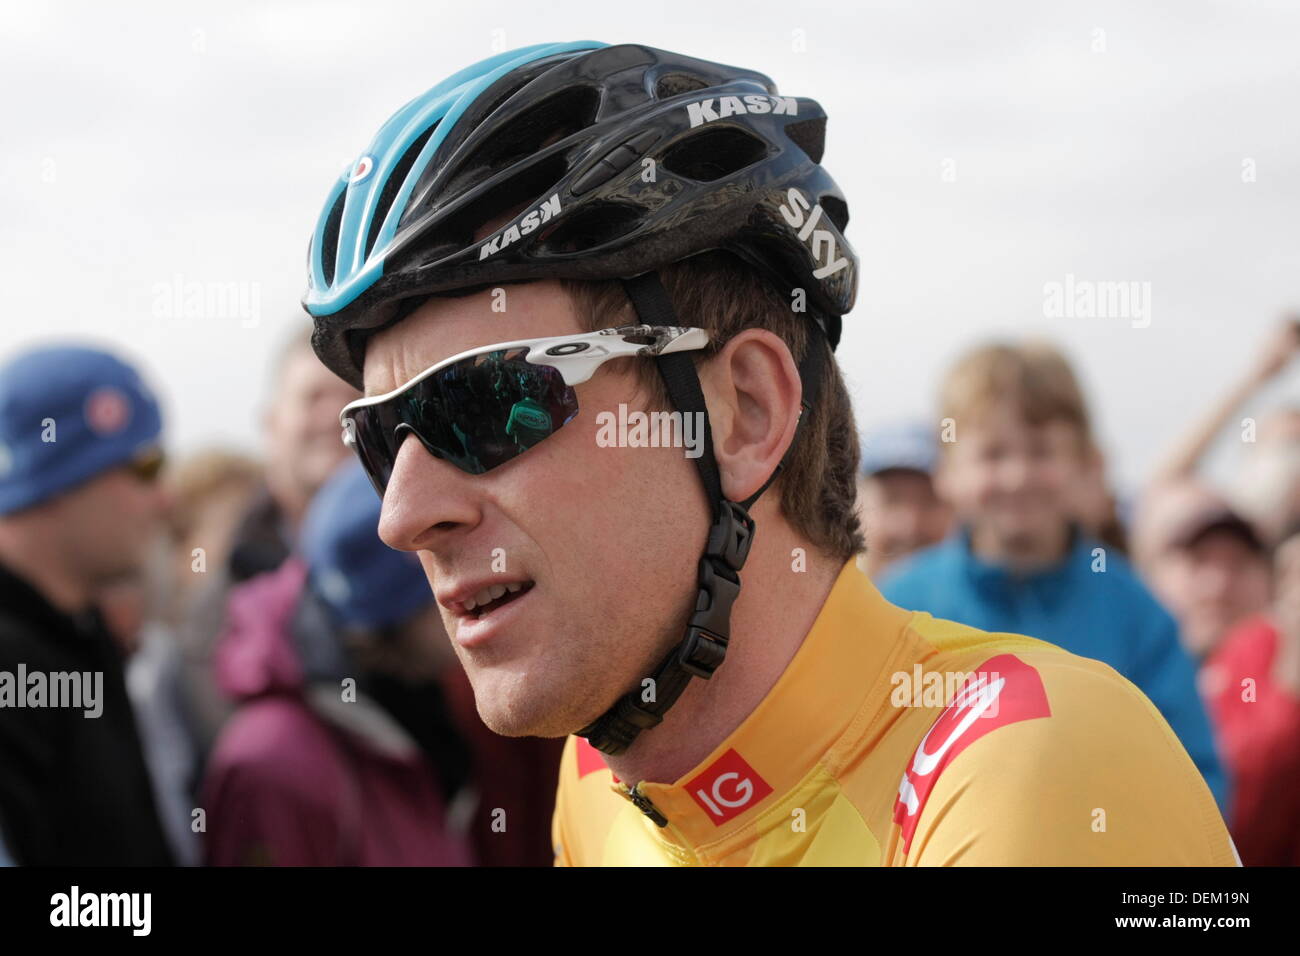 Sidmouth to Haytor, Devon, UK. 20th September 2013. Sir Bradley Wiggins in the yellow jersey of the overall leader before the start in Sidmouth Friday 20 September 2013 Tour of Britain Stage 6 Sidmouth to Haytor Dartmoor Devon UK Credit:  Anthony Collins/Alamy Live News Stock Photo